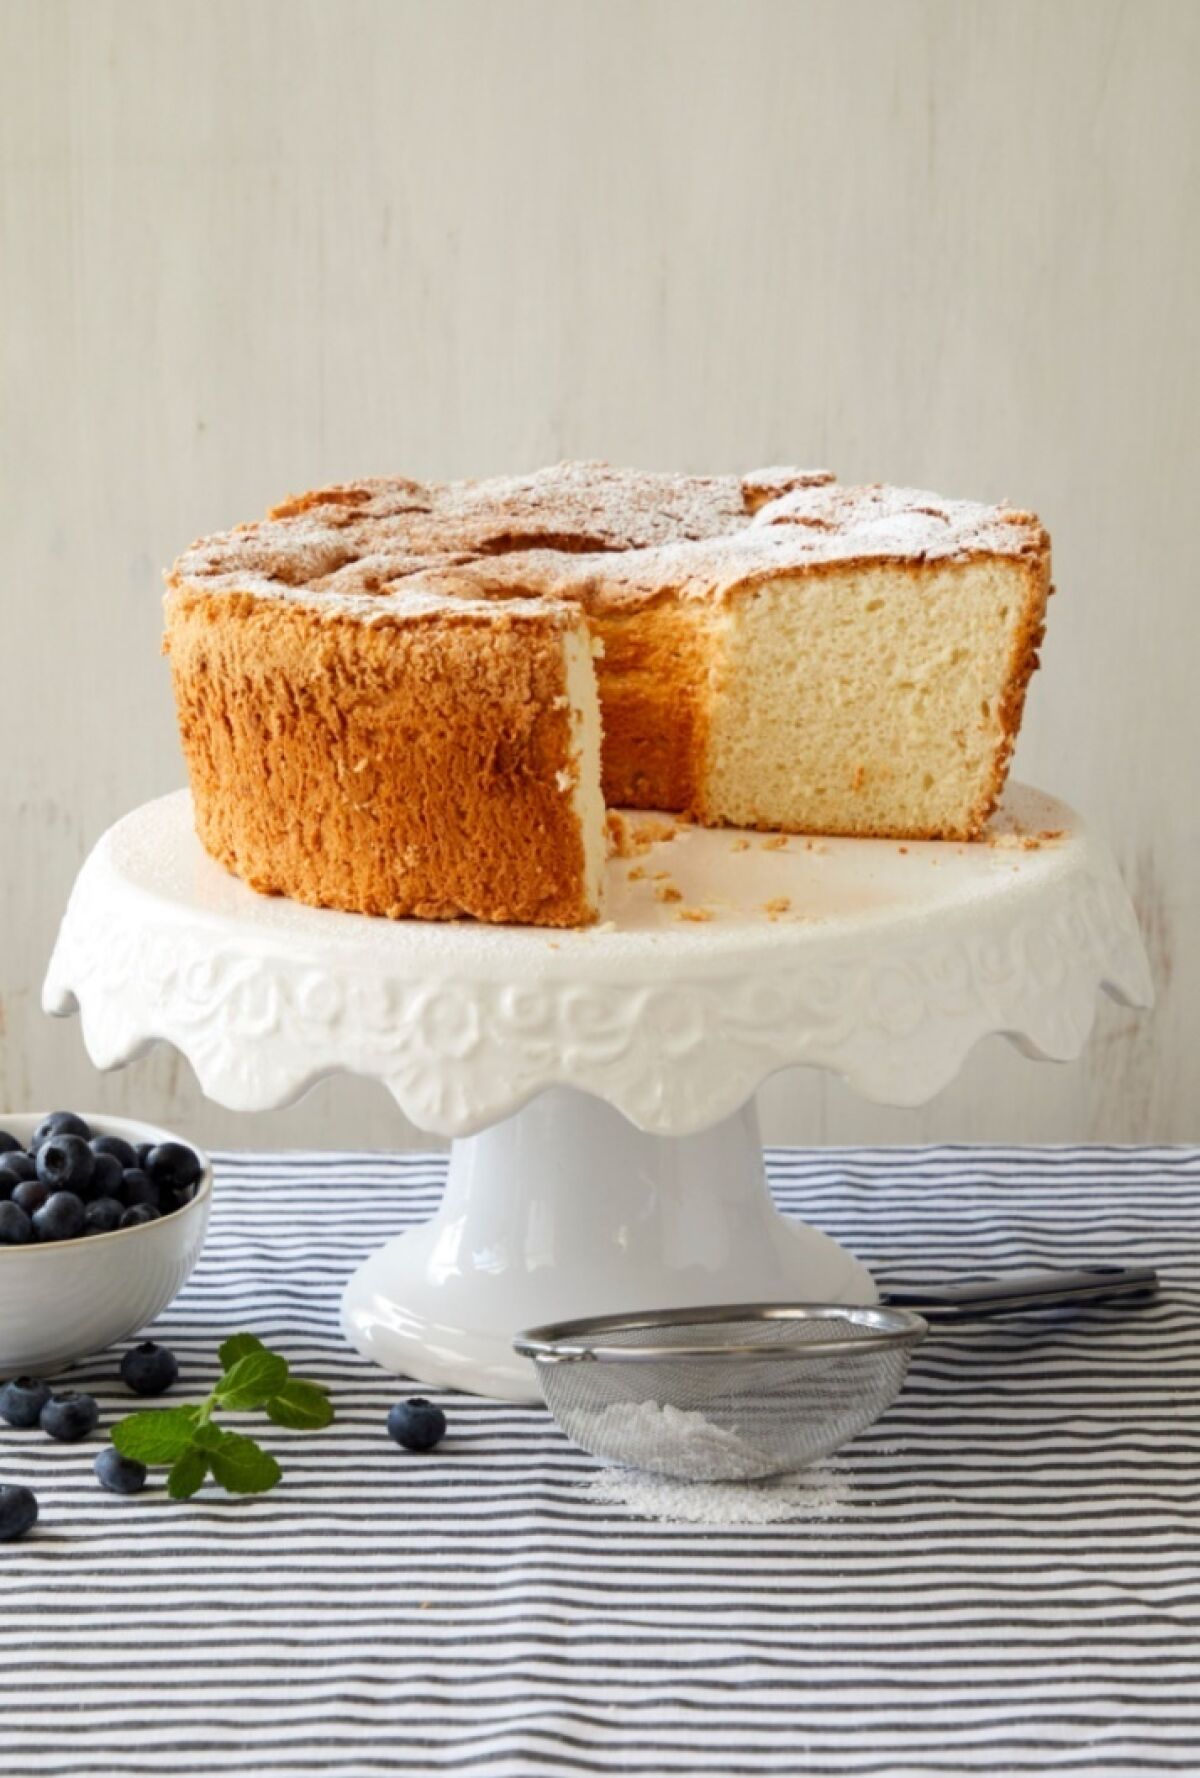 This image released by Harper Horizon shows a recipe for angel food cake from the cookbook "The Fresh Eggs Daily Cookbook" by Lisa Steele. (Tina Rupp/Harper Horizon via AP)